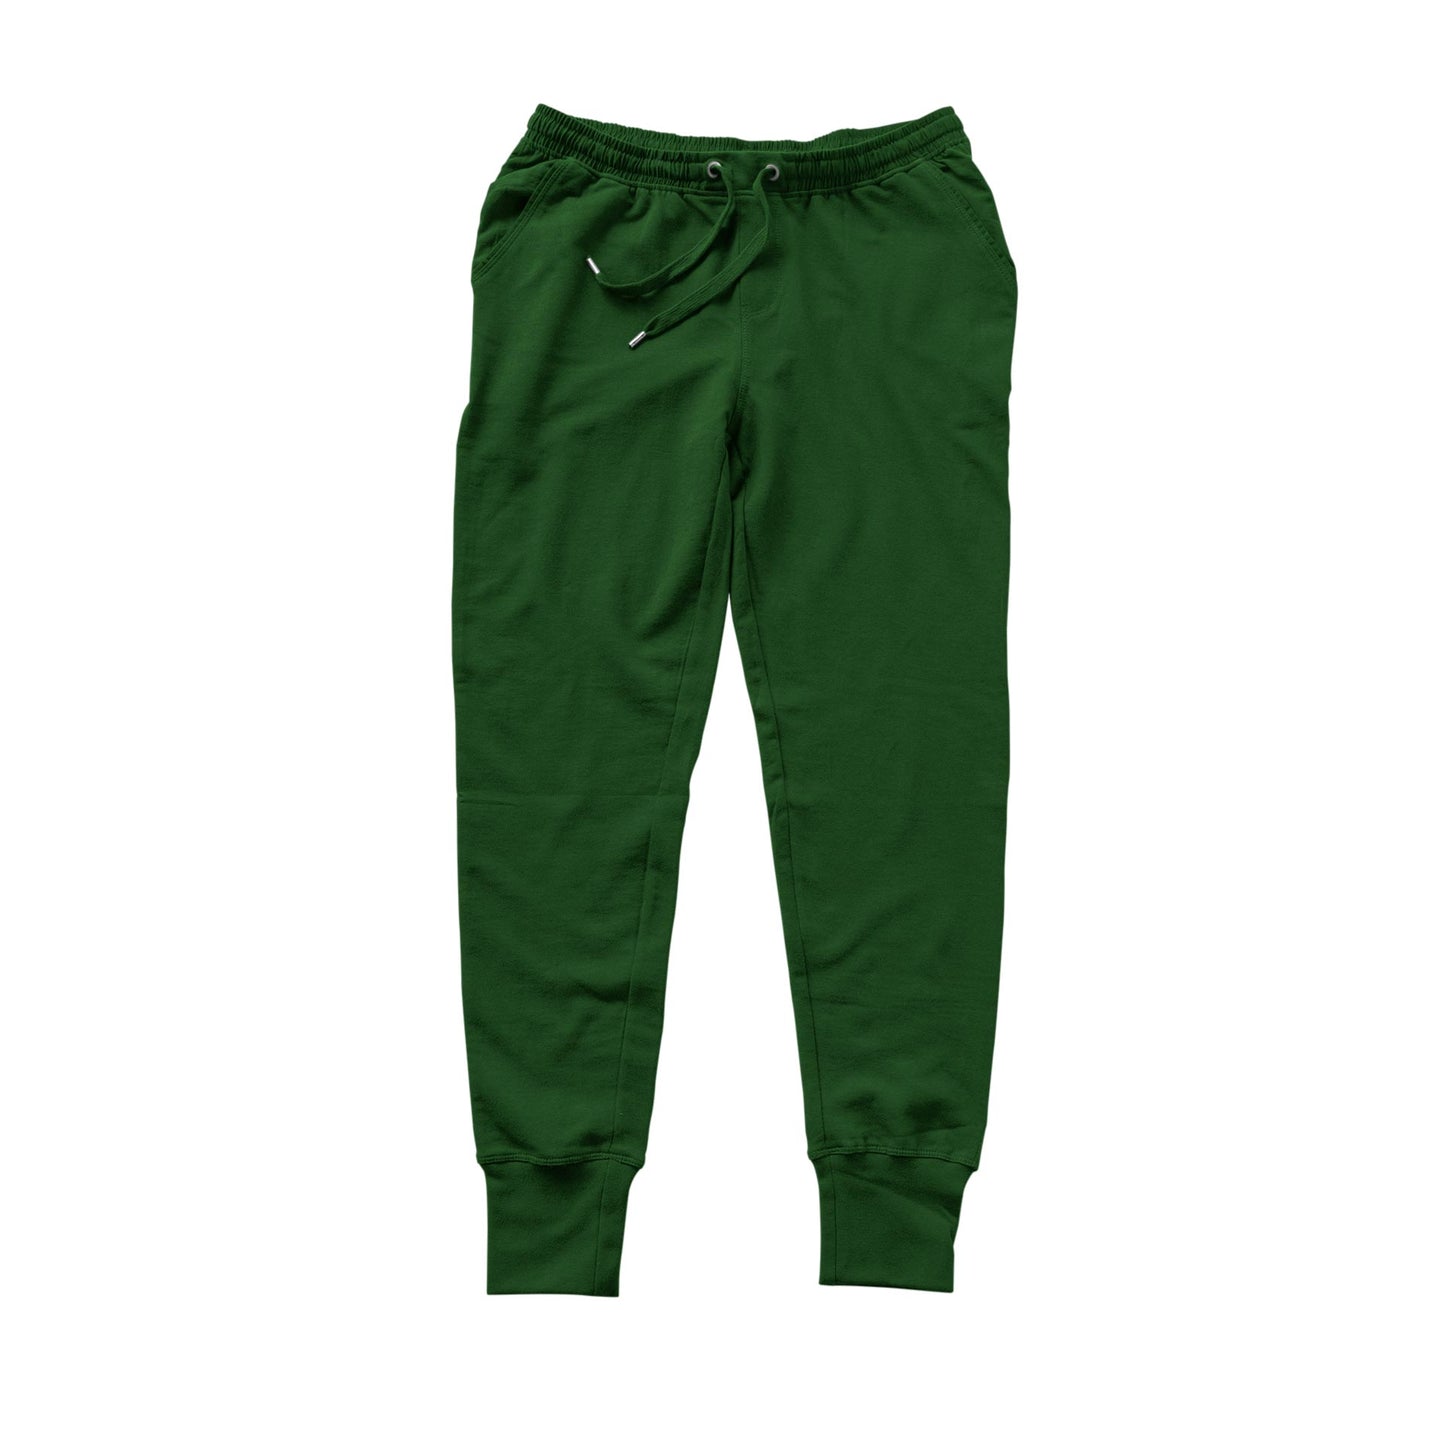 bottle green joggers unisex different variants the banyan tee joggers track pants cotton fleece comfortable jogger track pants joggers for boys bewakoof joggers track pants men track pants for women track pants nike track pants for girls track pants for boys lower for men lower lower for girls lower pant lower for men lower for boys